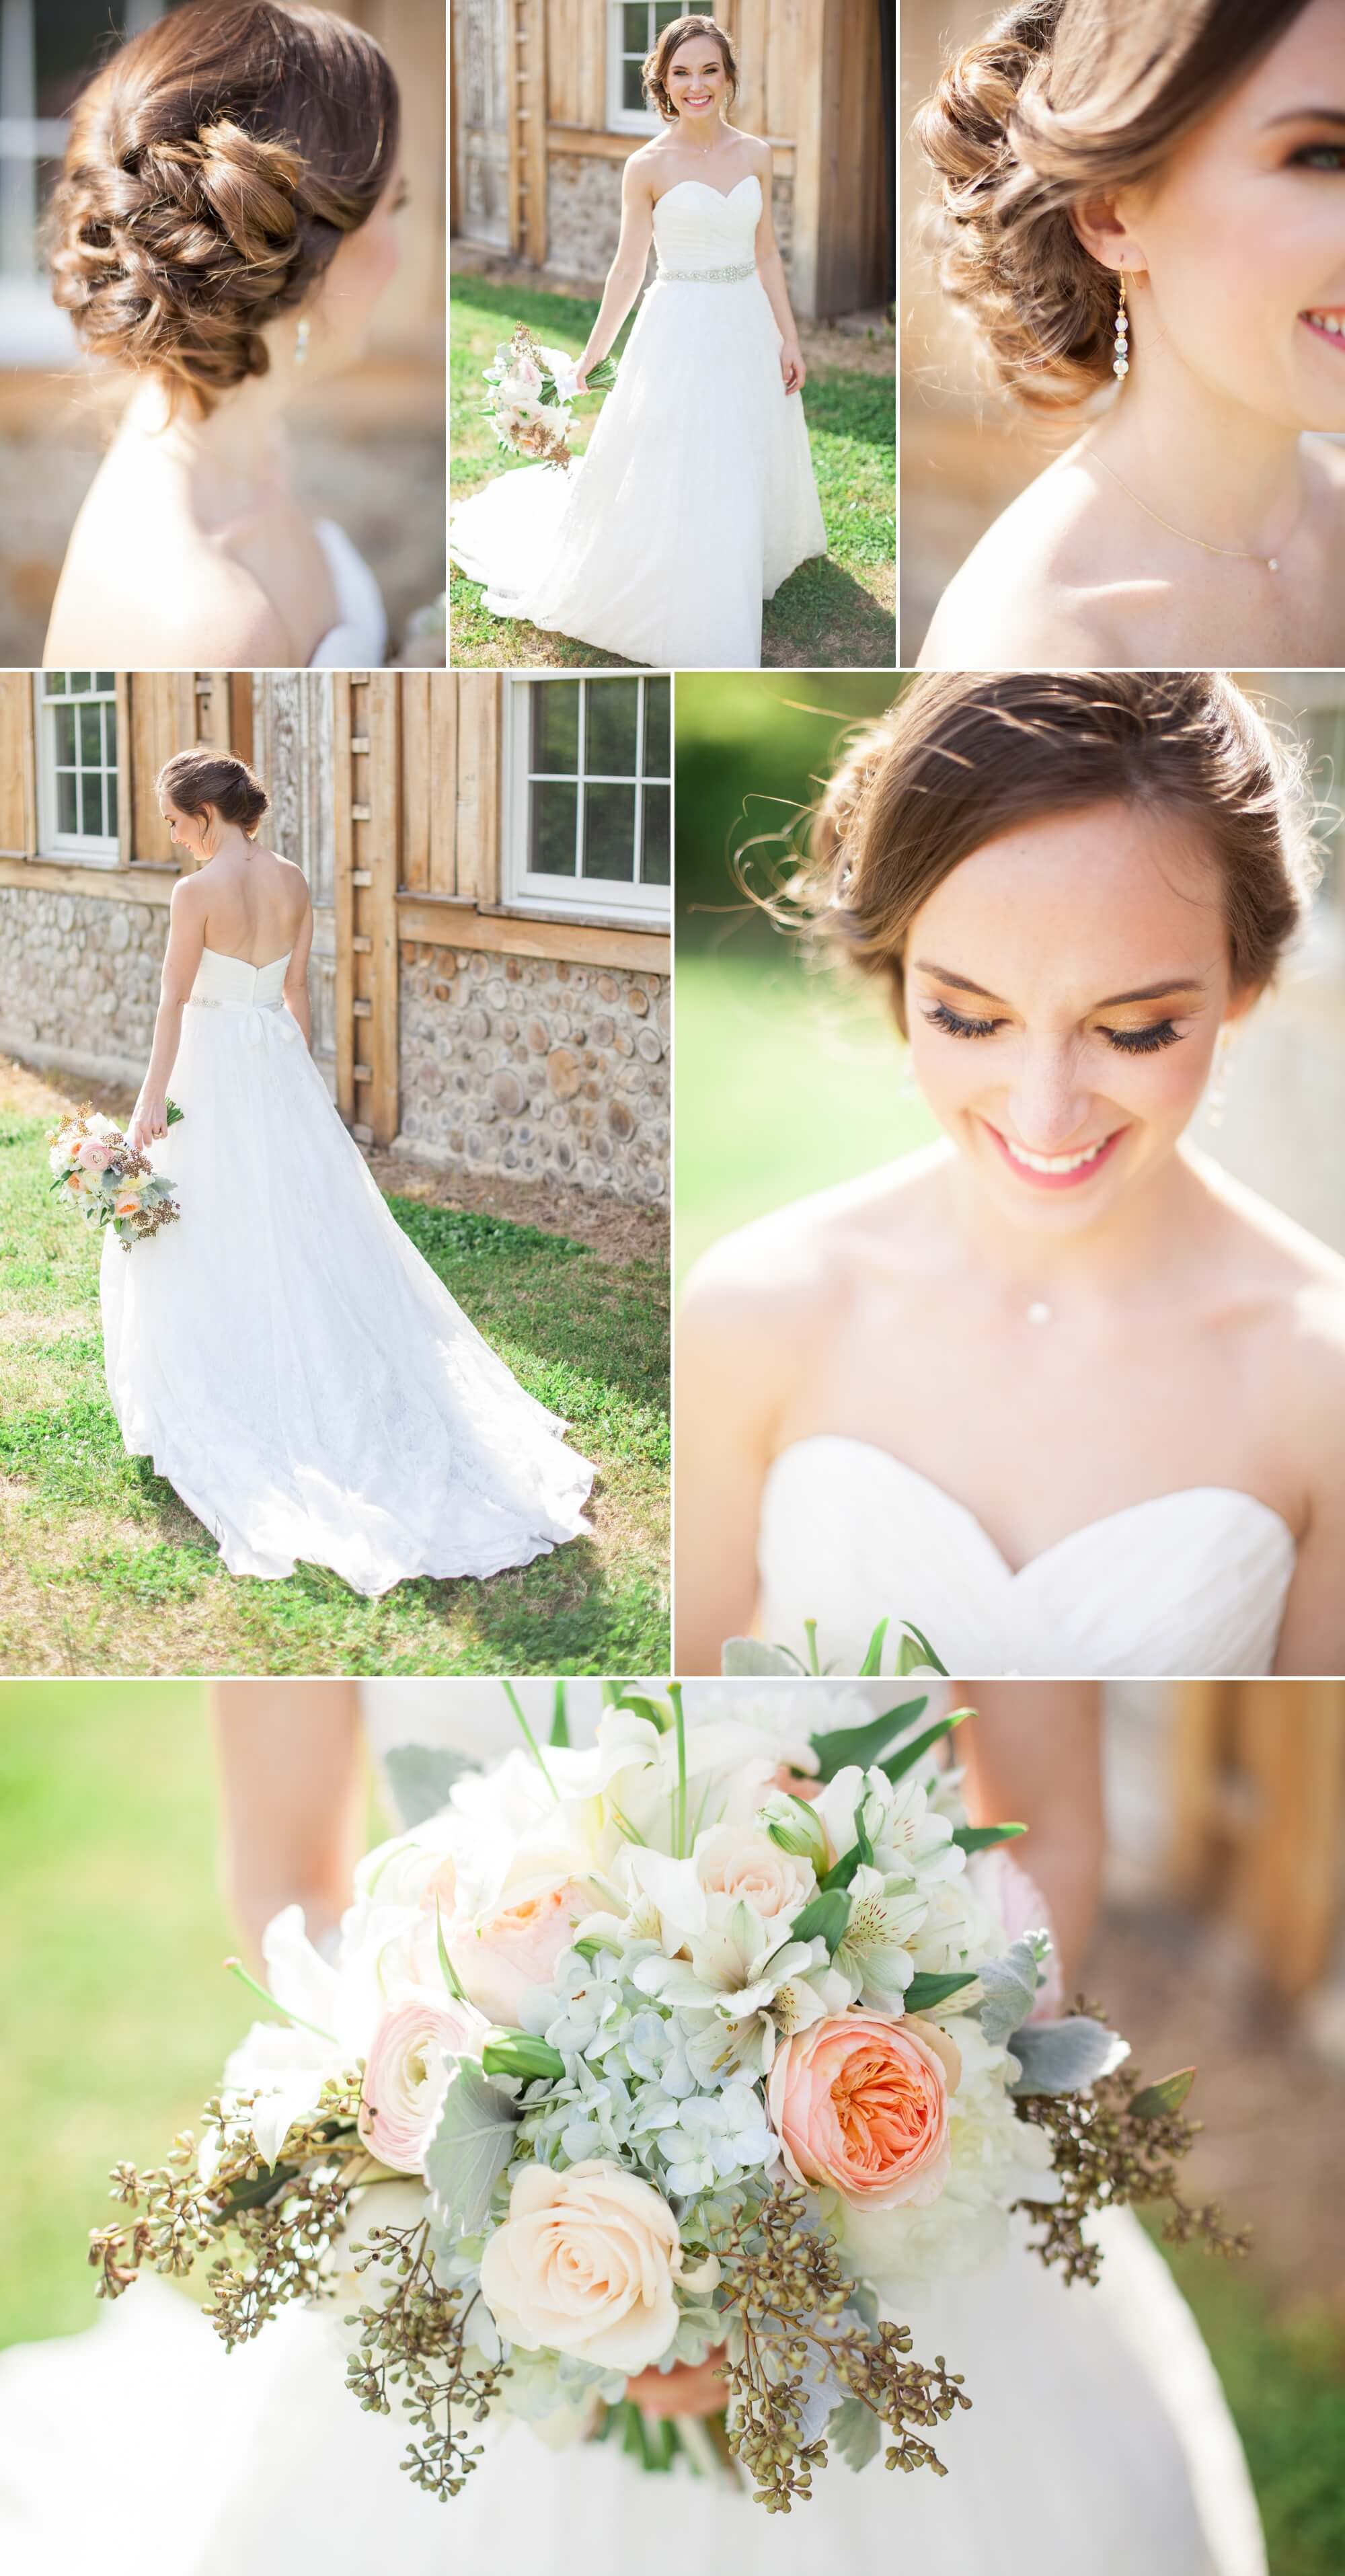 bride and details before wedding. Spring wedding at Cedarwood Weddings in Nashville, TN. Photo by Krista Lee Photography, from Sam and Izzy's wedding day.